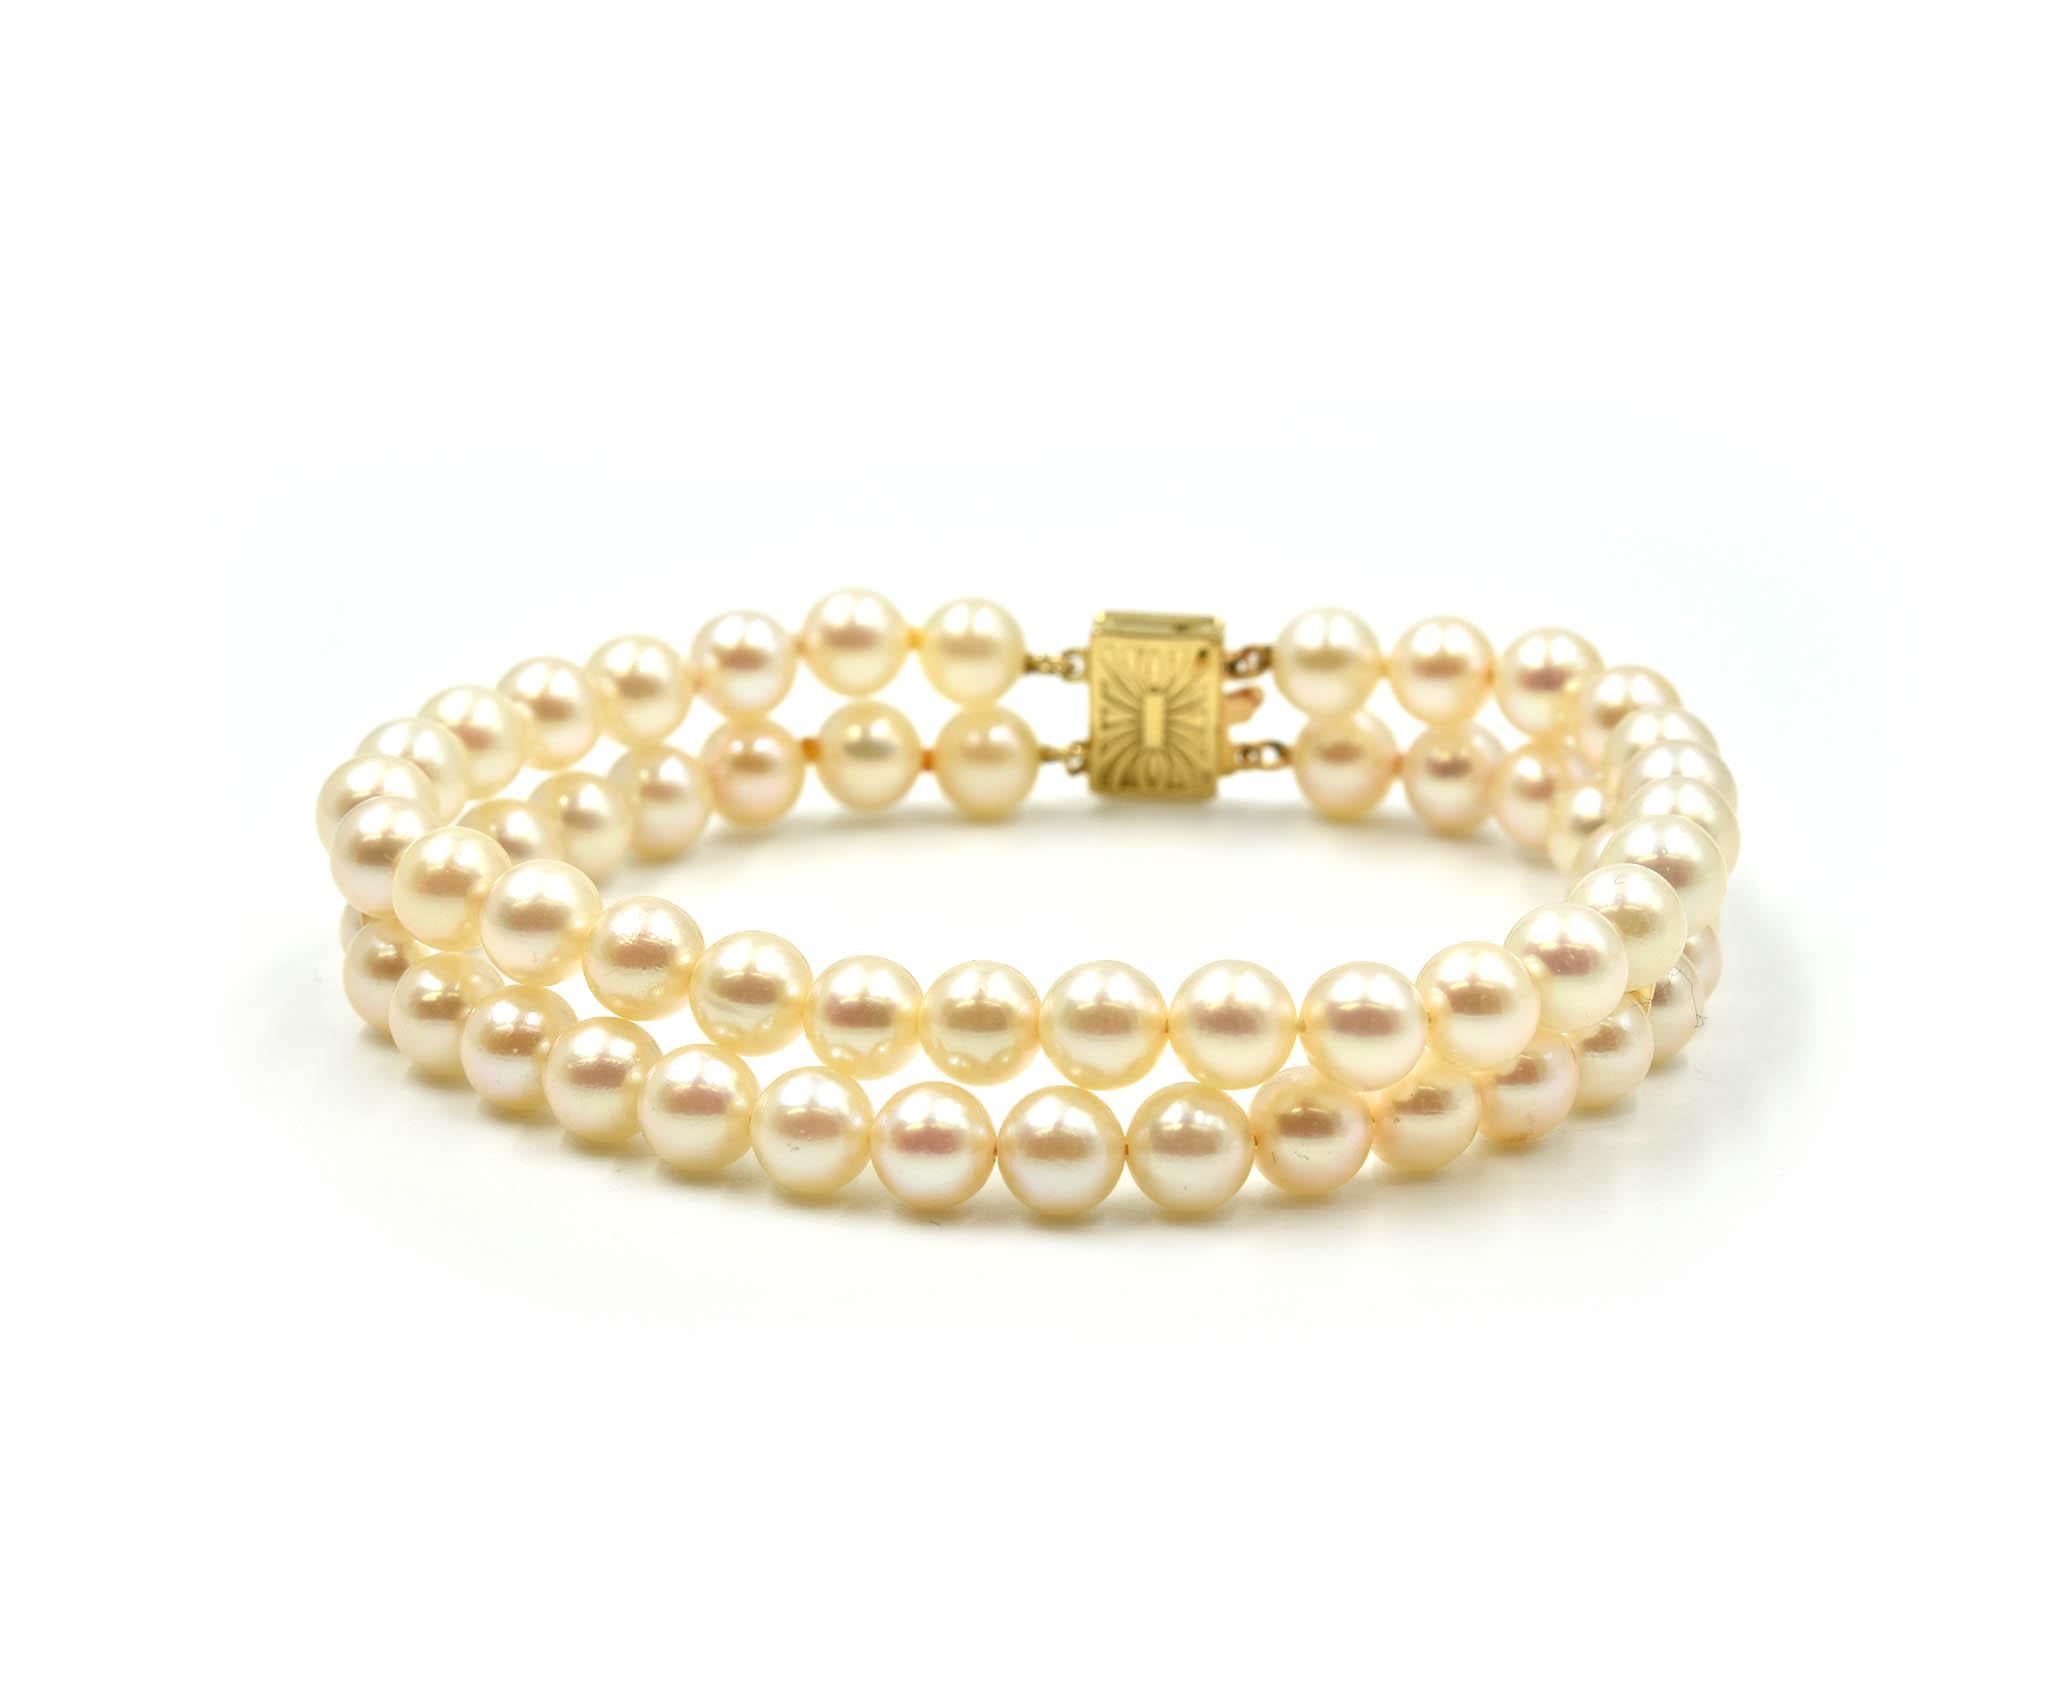 Designer: custom design
Material: 14k yellow gold
Pearls: round cultured pearls 5.80mm in diameter with silver overtones
Dimensions: bracelet will fit up to a 7-inch wrist, bracelet is a 1/2 inch wide
Weight: 17.10 grams
